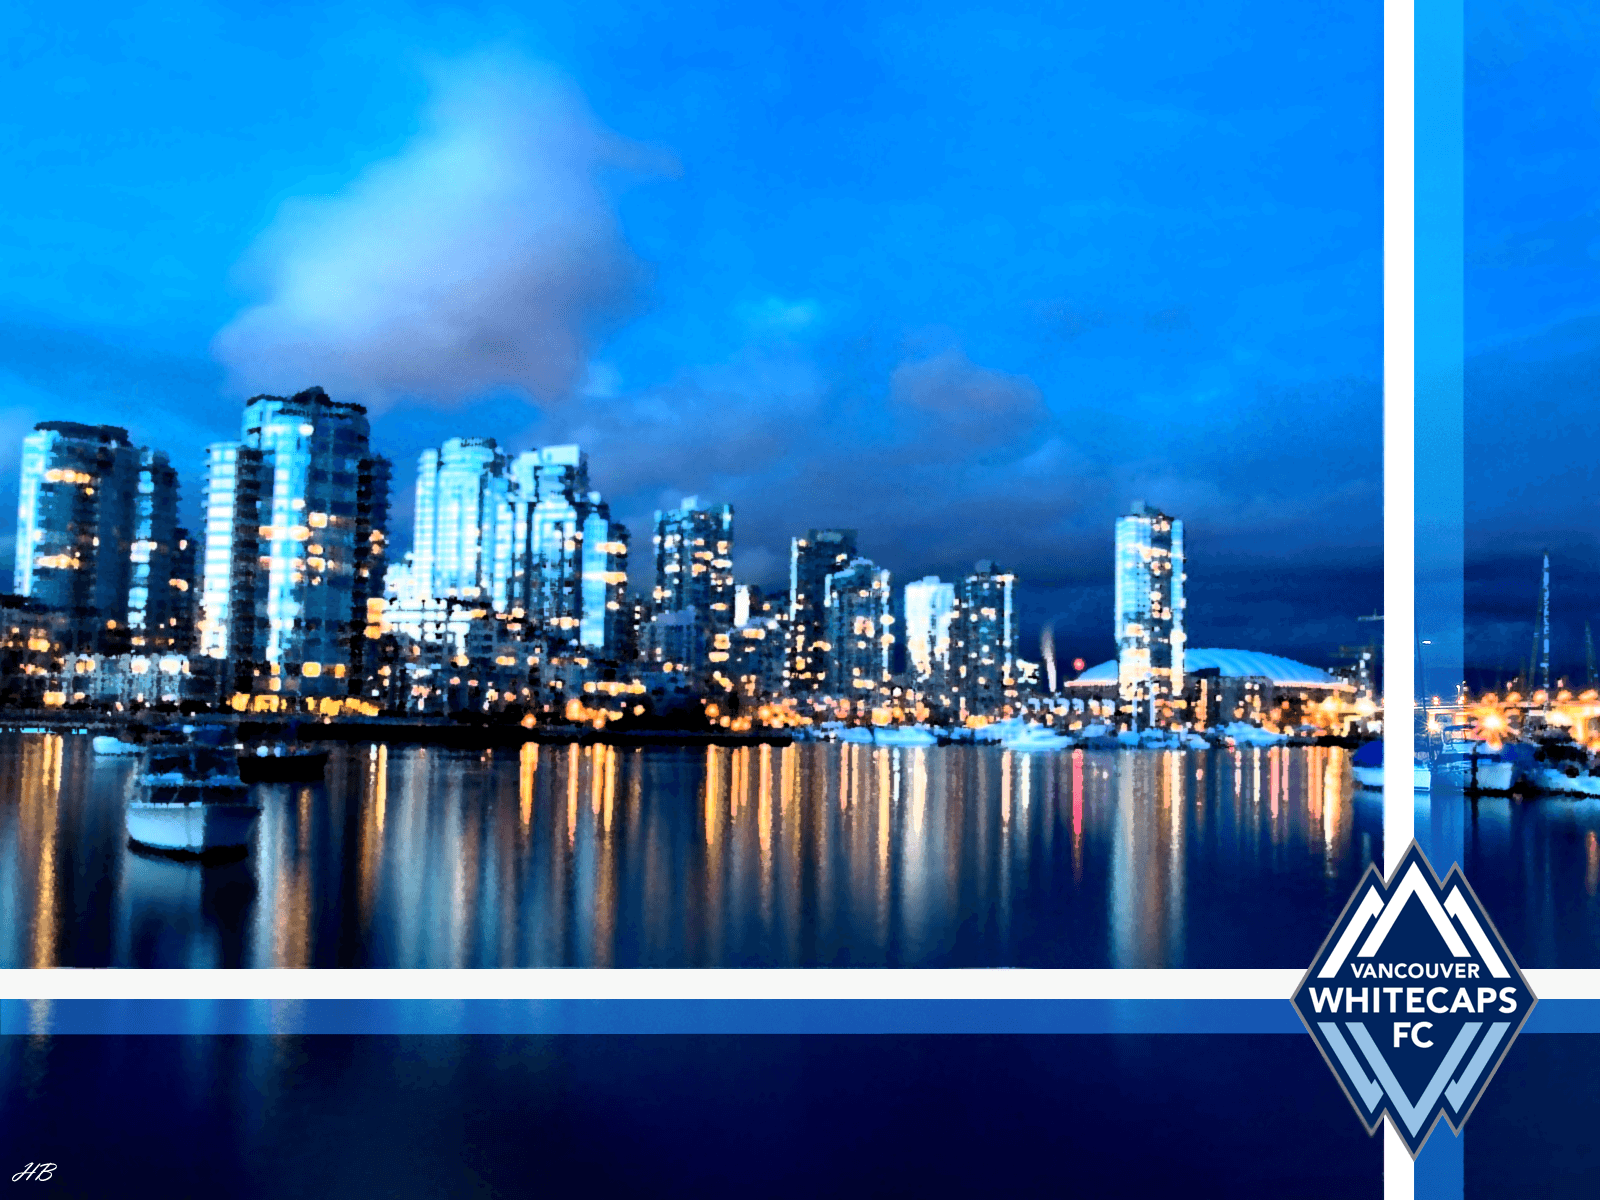 Download wallpapers Vancouver Whitecaps, golden logo, MLS, blue metal  background, canadian soccer club, Vancouver Whitecaps FC, United Soccer  League, Vancouver Whitecaps logo, soccer, USA for desktop with resolution  2880x1800. High Quality HD